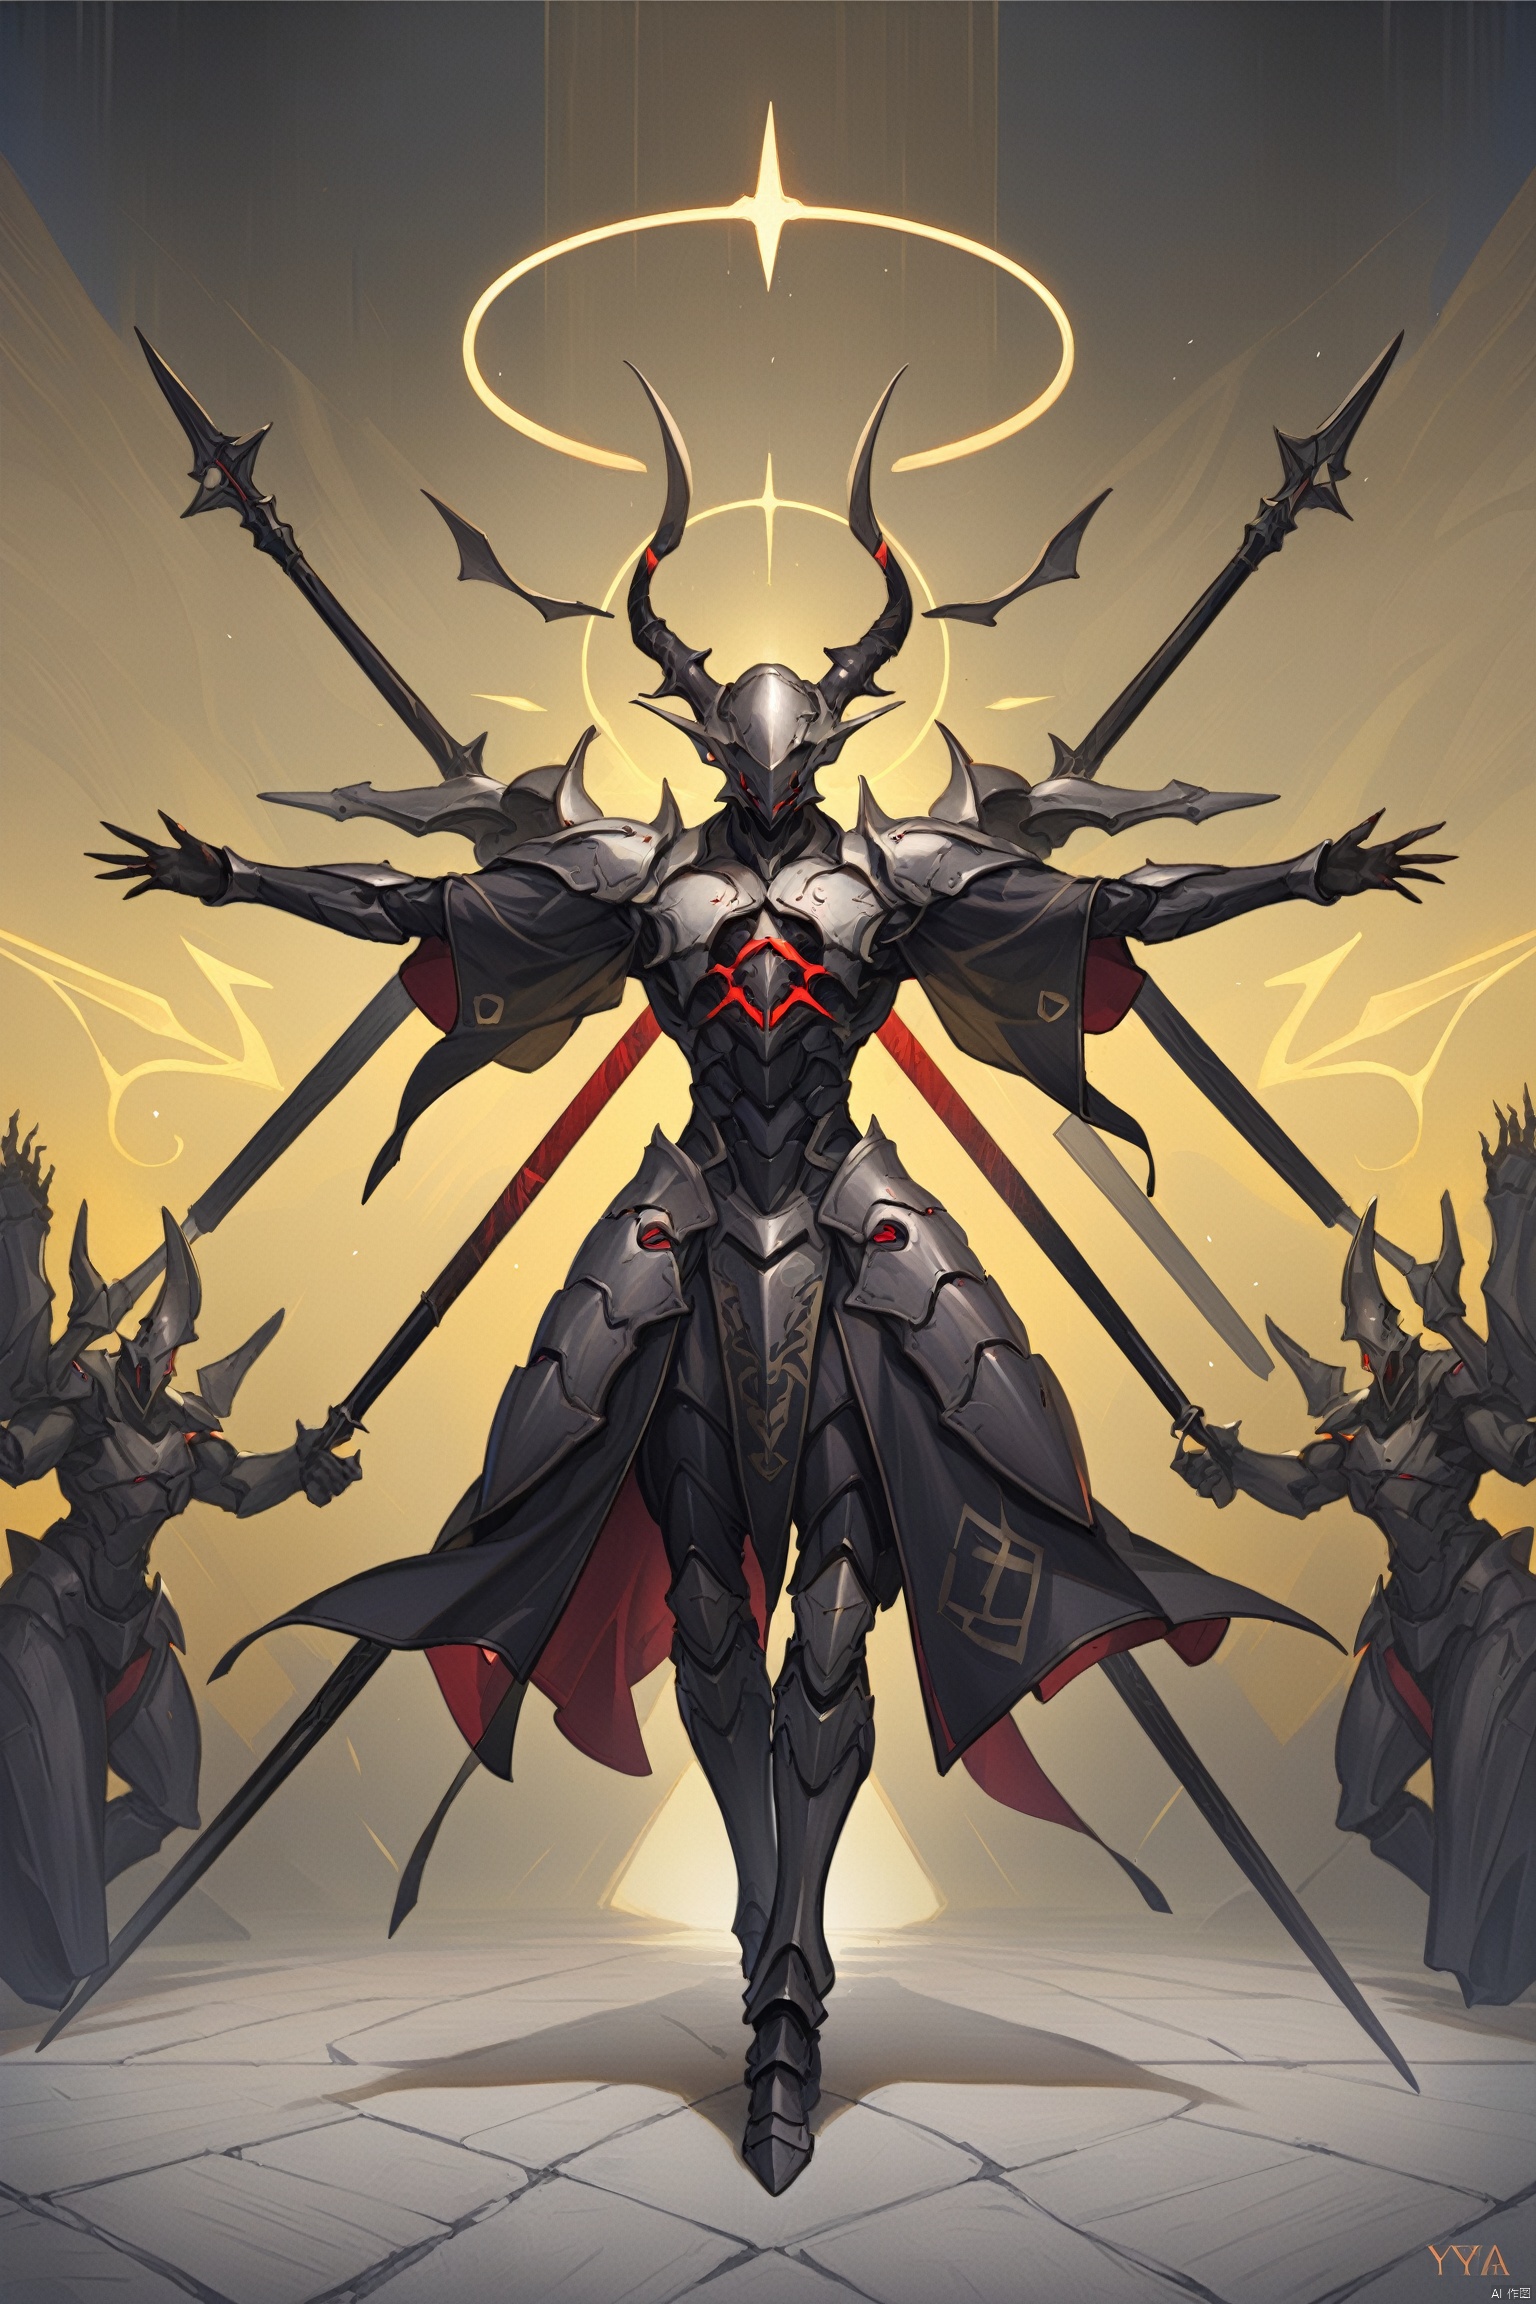  best quality,masterpiece,jijia, 2d, anime, solo, halo, weapon, armor, extra arms, polearm, floating, outstretched arms, helmet, open hands, no humans, spear, full body, full armor,a painting of a demon with five arms,a drawing of a dark character standing in front of a symbol, yyy